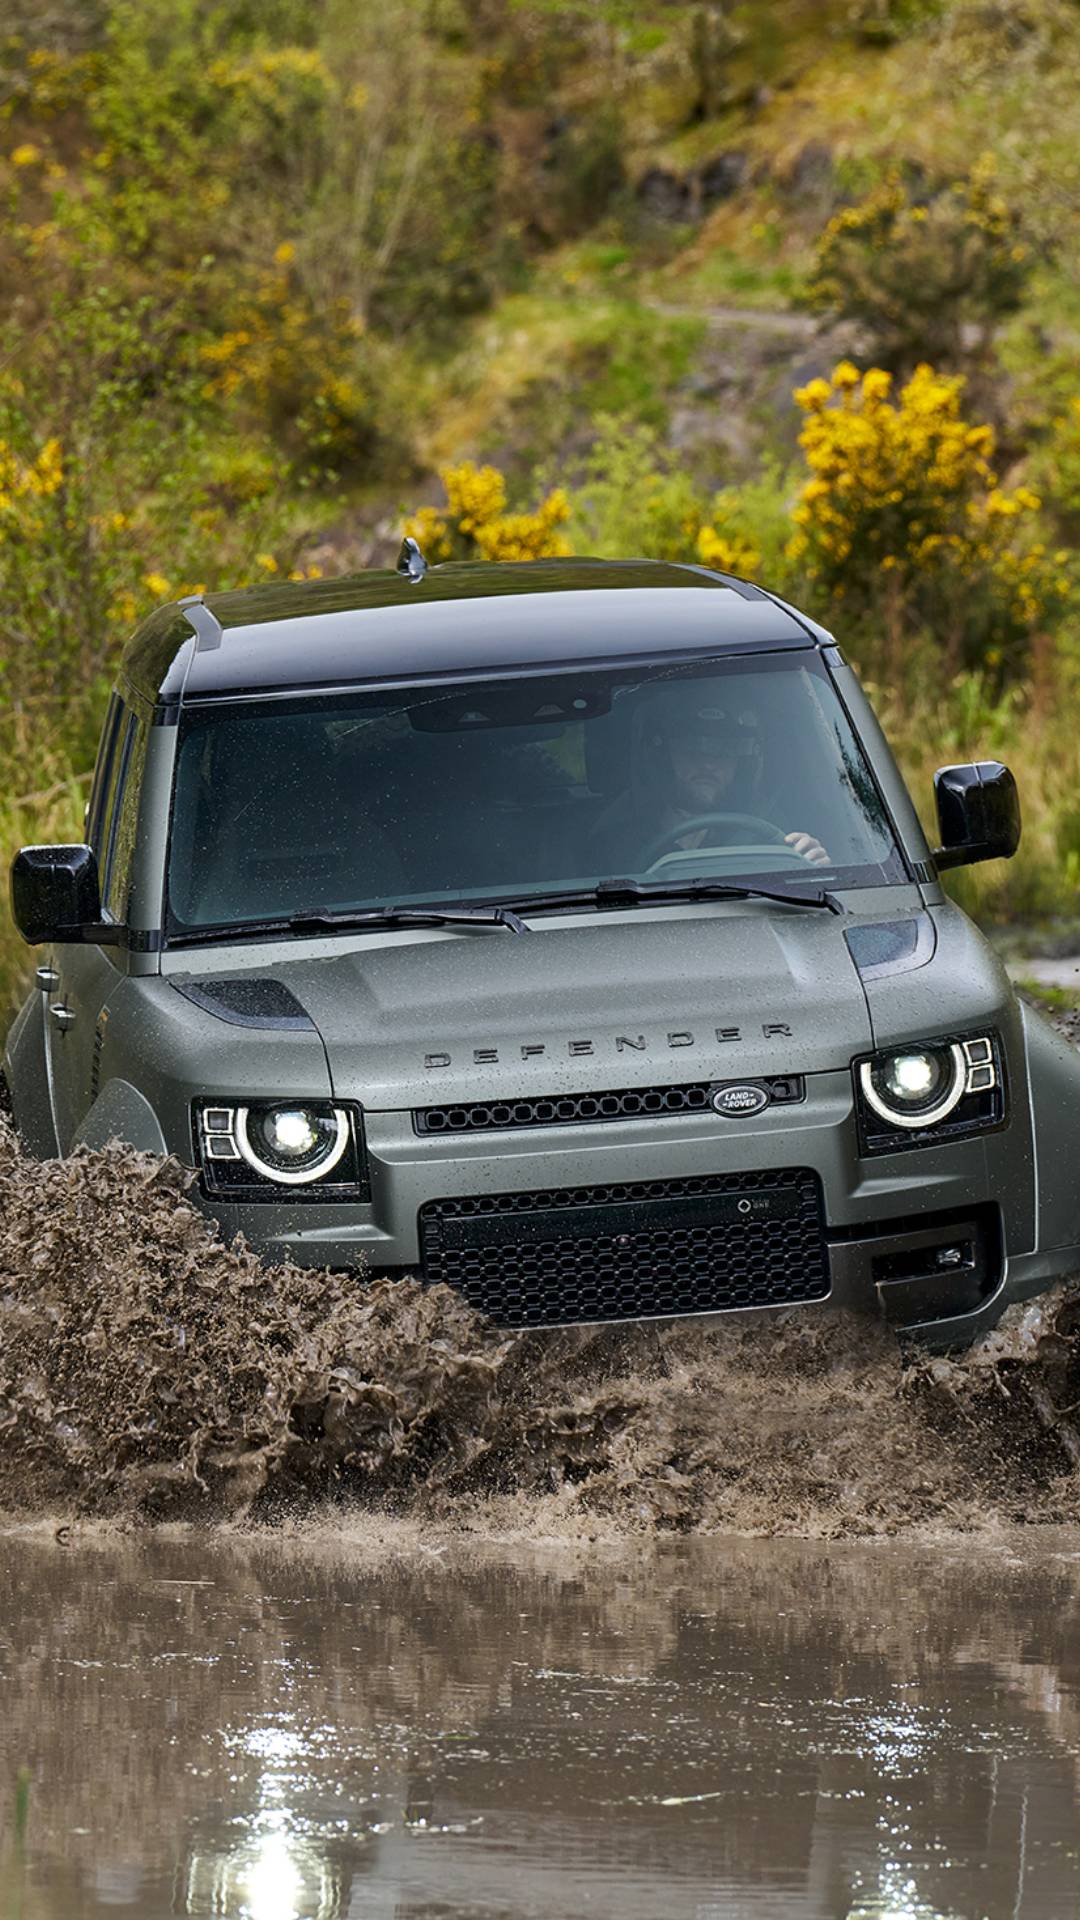 Land Rover Defender Octa revealed: Top features here